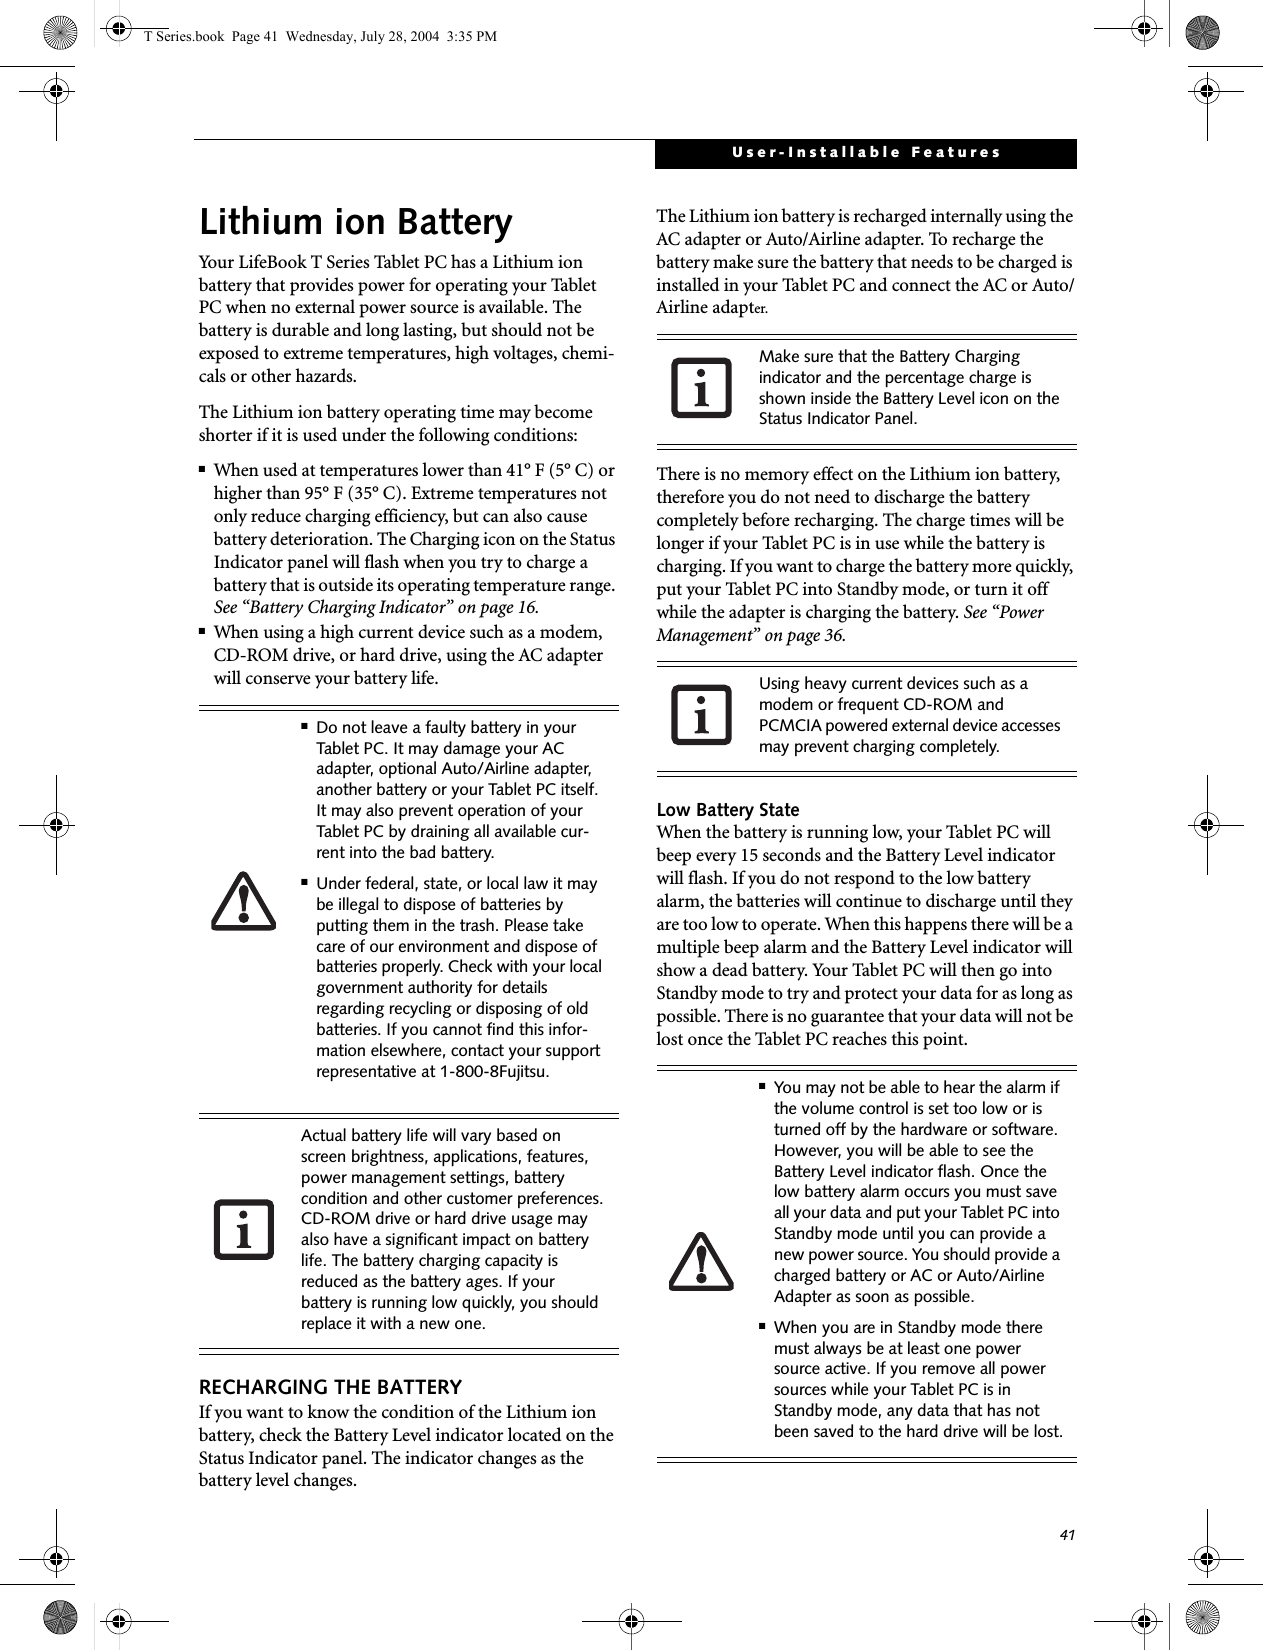 41User-Installable FeaturesLithium ion BatteryYour LifeBook T Series Tablet PC has a Lithium ion battery that provides power for operating your Tablet PC when no external power source is available. The battery is durable and long lasting, but should not be exposed to extreme temperatures, high voltages, chemi-cals or other hazards.The Lithium ion battery operating time may become shorter if it is used under the following conditions:■When used at temperatures lower than 41° F (5° C) or higher than 95° F (35° C). Extreme temperatures not only reduce charging efficiency, but can also cause battery deterioration. The Charging icon on the Status Indicator panel will flash when you try to charge a battery that is outside its operating temperature range. See “Battery Charging Indicator” on page 16.■When using a high current device such as a modem, CD-ROM drive, or hard drive, using the AC adapter will conserve your battery life.RECHARGING THE BATTERYIf you want to know the condition of the Lithium ion battery, check the Battery Level indicator located on the Status Indicator panel. The indicator changes as the battery level changes.The Lithium ion battery is recharged internally using the AC adapter or Auto/Airline adapter. To recharge the battery make sure the battery that needs to be charged is installed in your Tablet PC and connect the AC or Auto/Airline adapter.There is no memory effect on the Lithium ion battery, therefore you do not need to discharge the battery completely before recharging. The charge times will be longer if your Tablet PC is in use while the battery is charging. If you want to charge the battery more quickly, put your Tablet PC into Standby mode, or turn it off while the adapter is charging the battery. See “Power Management” on page 36.Low Battery StateWhen the battery is running low, your Tablet PC will beep every 15 seconds and the Battery Level indicator will flash. If you do not respond to the low battery alarm, the batteries will continue to discharge until they are too low to operate. When this happens there will be a multiple beep alarm and the Battery Level indicator will show a dead battery. Your Tablet PC will then go into Standby mode to try and protect your data for as long as possible. There is no guarantee that your data will not be lost once the Tablet PC reaches this point.■Do not leave a faulty battery in your Tablet PC. It may damage your AC adapter, optional Auto/Airline adapter, another battery or your Tablet PC itself. It may also prevent operation of your Tablet PC by draining all available cur-rent into the bad battery.■Under federal, state, or local law it may be illegal to dispose of batteries by putting them in the trash. Please take care of our environment and dispose of batteries properly. Check with your local government authority for details regarding recycling or disposing of old batteries. If you cannot find this infor-mation elsewhere, contact your support representative at 1-800-8Fujitsu.Actual battery life will vary based on screen brightness, applications, features, power management settings, battery condition and other customer preferences.CD-ROM drive or hard drive usage may also have a significant impact on battery life. The battery charging capacity is reduced as the battery ages. If your battery is running low quickly, you should replace it with a new one.Make sure that the Battery Charging indicator and the percentage charge is shown inside the Battery Level icon on the Status Indicator Panel.Using heavy current devices such as a modem or frequent CD-ROM and PCMCIA powered external device accesses may prevent charging completely.■You may not be able to hear the alarm if the volume control is set too low or is turned off by the hardware or software. However, you will be able to see the Battery Level indicator flash. Once the low battery alarm occurs you must save all your data and put your Tablet PC into Standby mode until you can provide a new power source. You should provide a charged battery or AC or Auto/Airline Adapter as soon as possible. ■When you are in Standby mode there must always be at least one power source active. If you remove all power sources while your Tablet PC is in Standby mode, any data that has not been saved to the hard drive will be lost.T Series.book  Page 41  Wednesday, July 28, 2004  3:35 PM